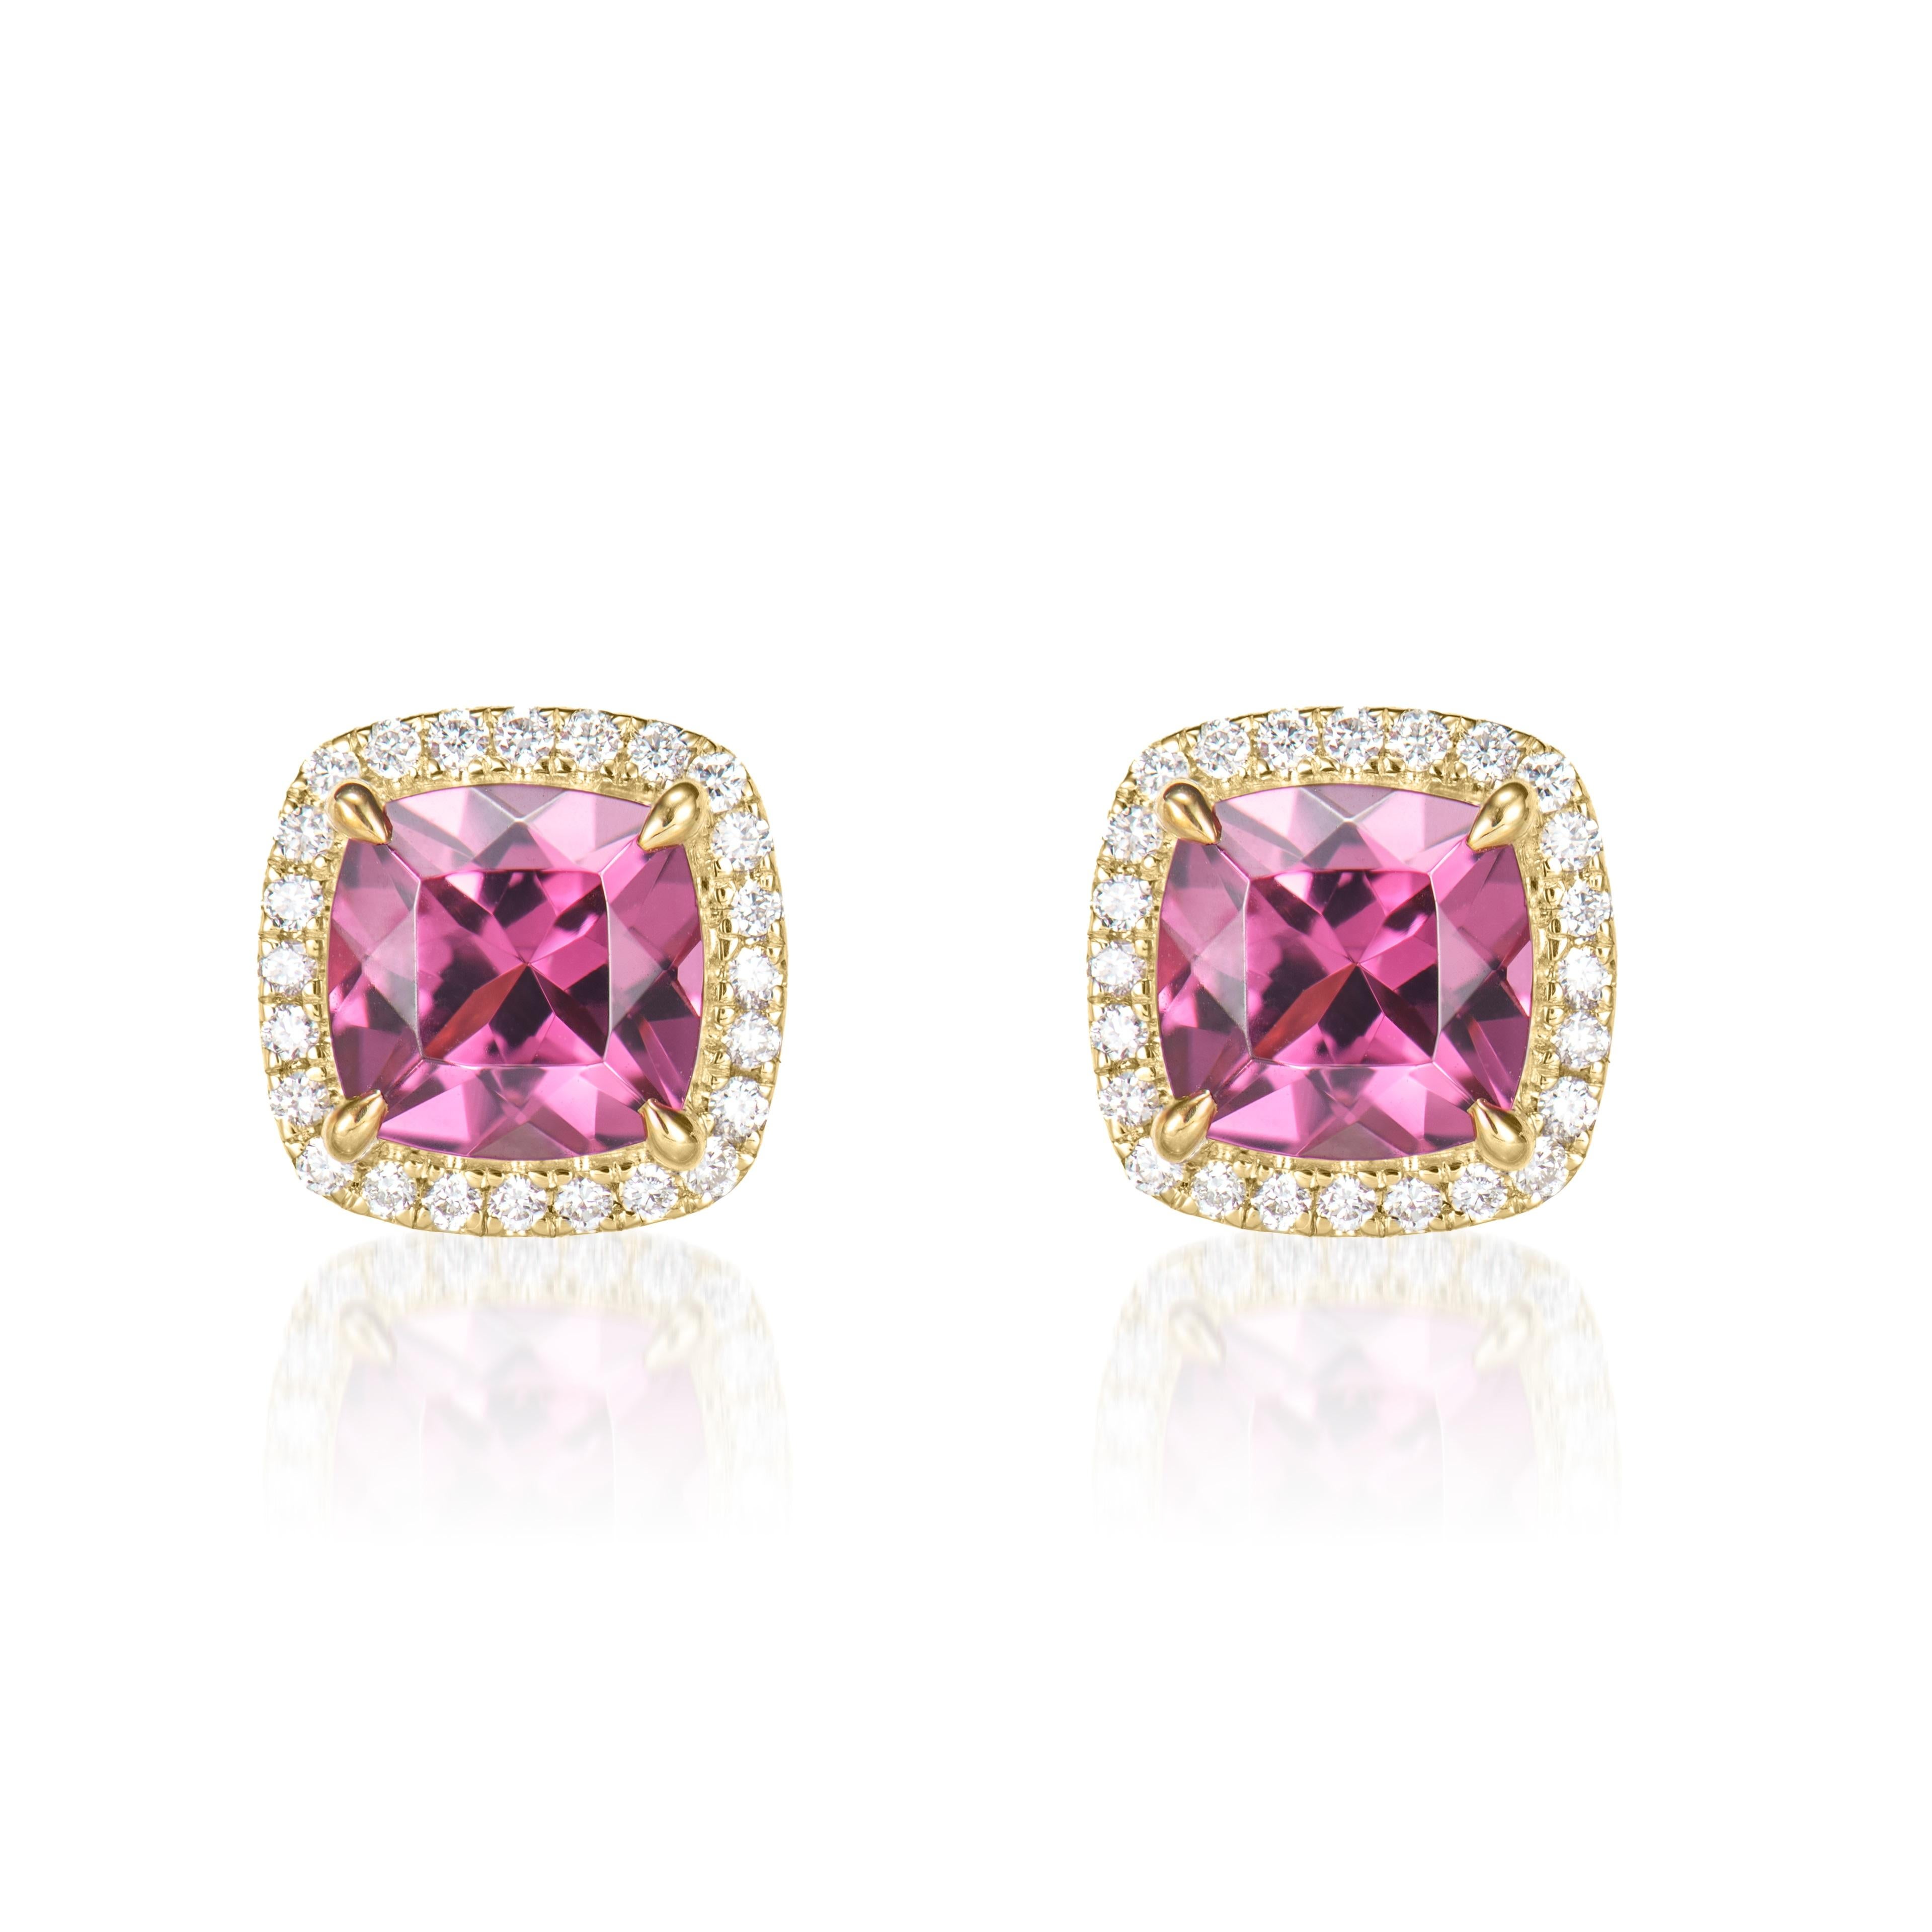 Contemporary 2.39 Carat Rhodolite Stud Earrings in 18Karat Yellow Gold with White Diamond. For Sale